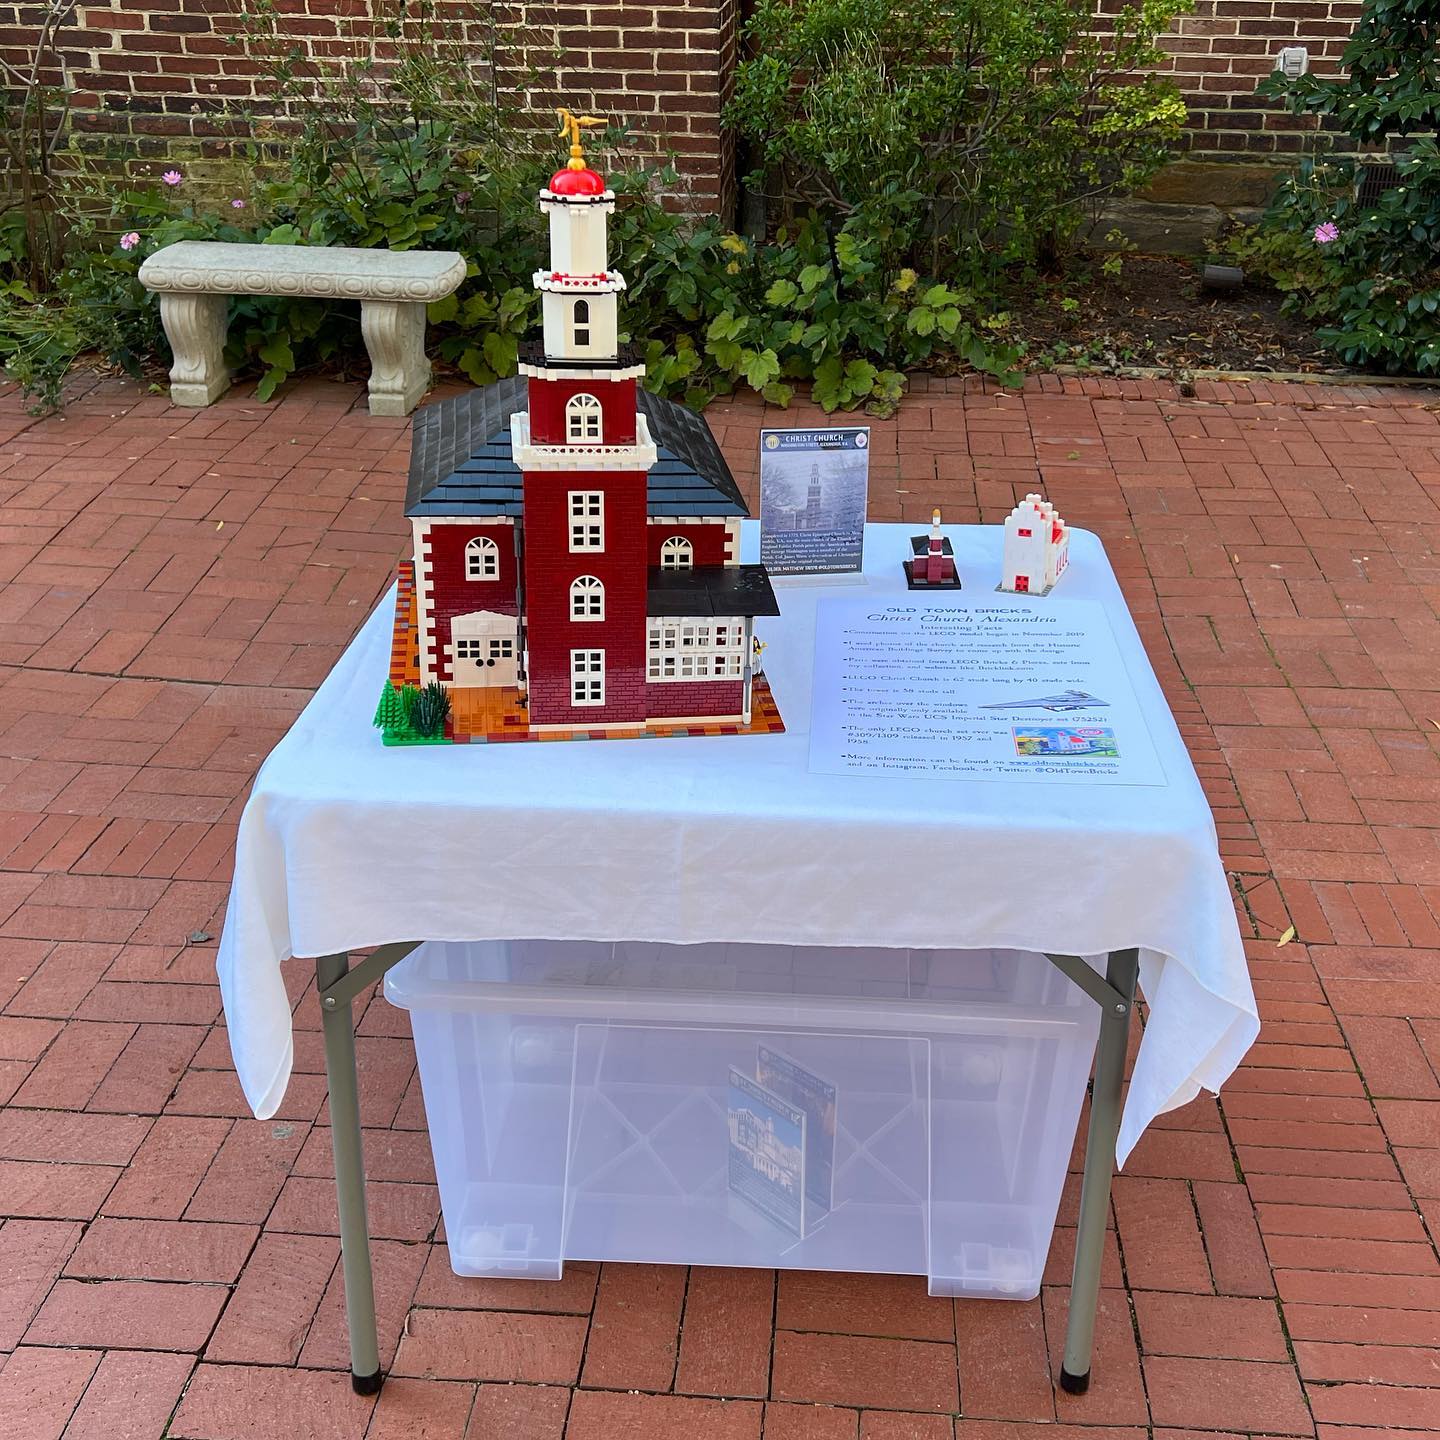 The LEGO version of Christ Church is set up at today’s Advent Fair at @christchurchalexandria! Come see the model before 12:30pm in #OldTownAlexandria